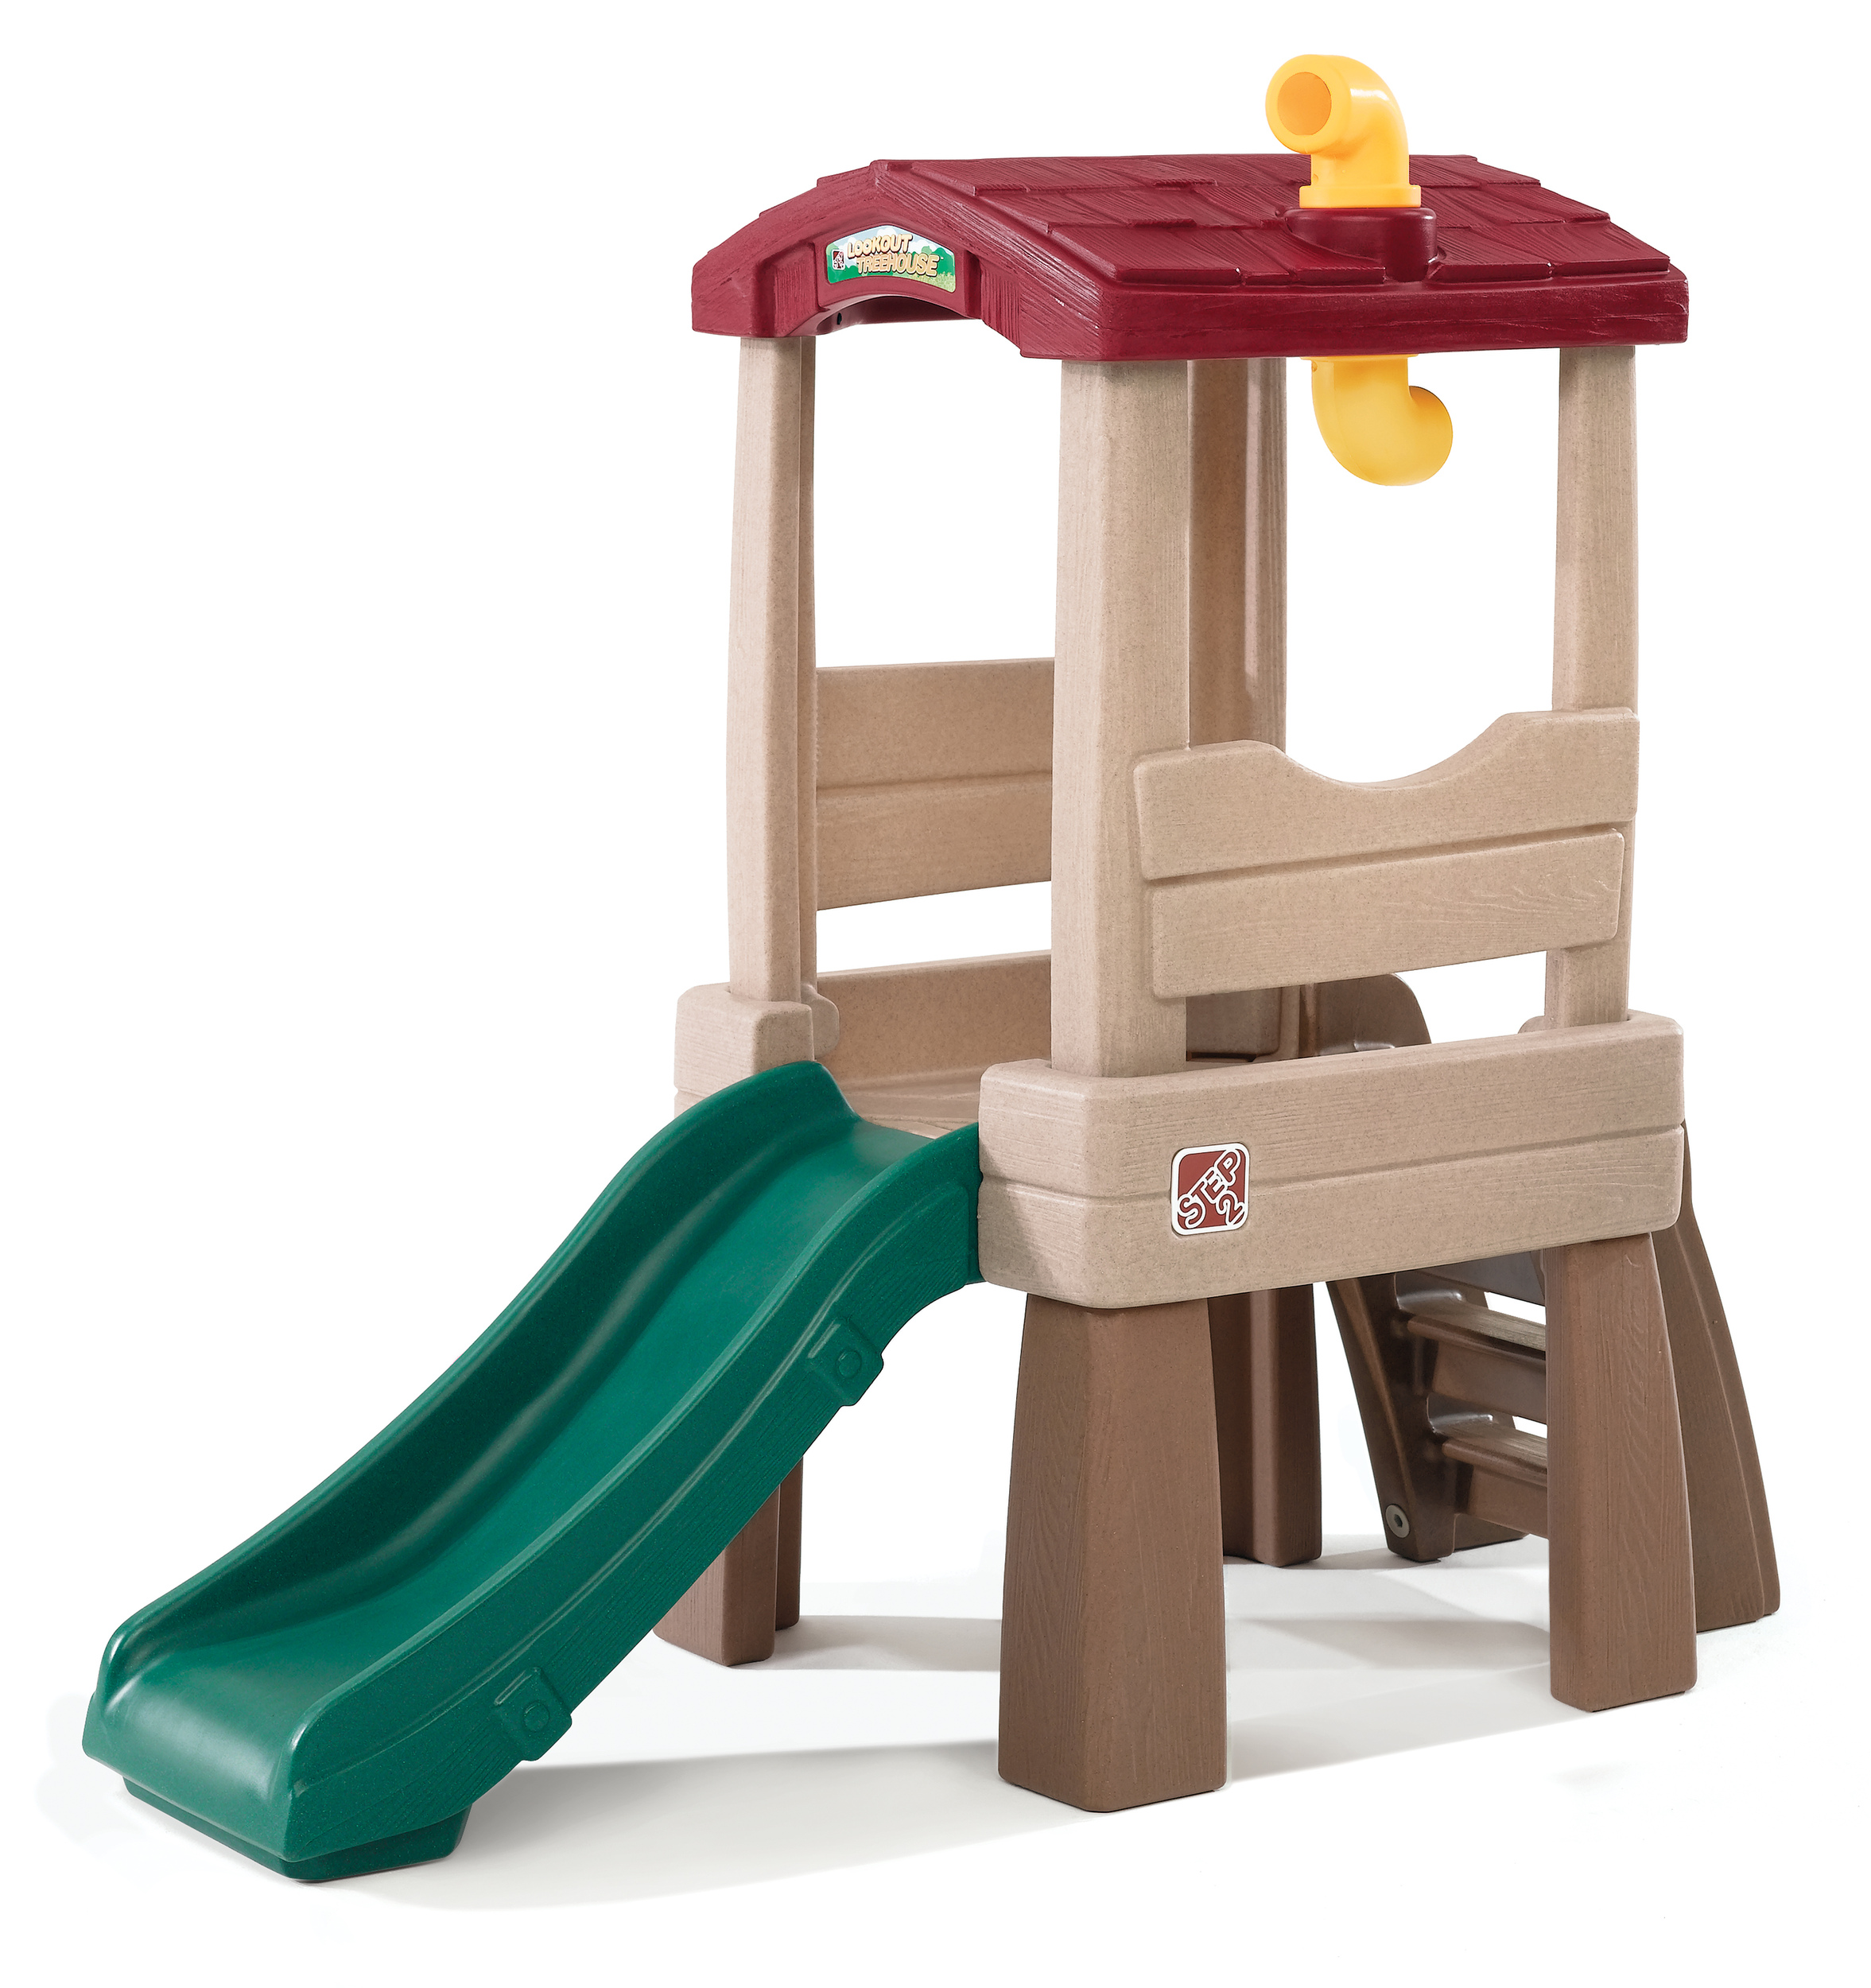 Step2 Naturally Playful Lookout Treehouse Toddler Climber with Slide - image 1 of 5